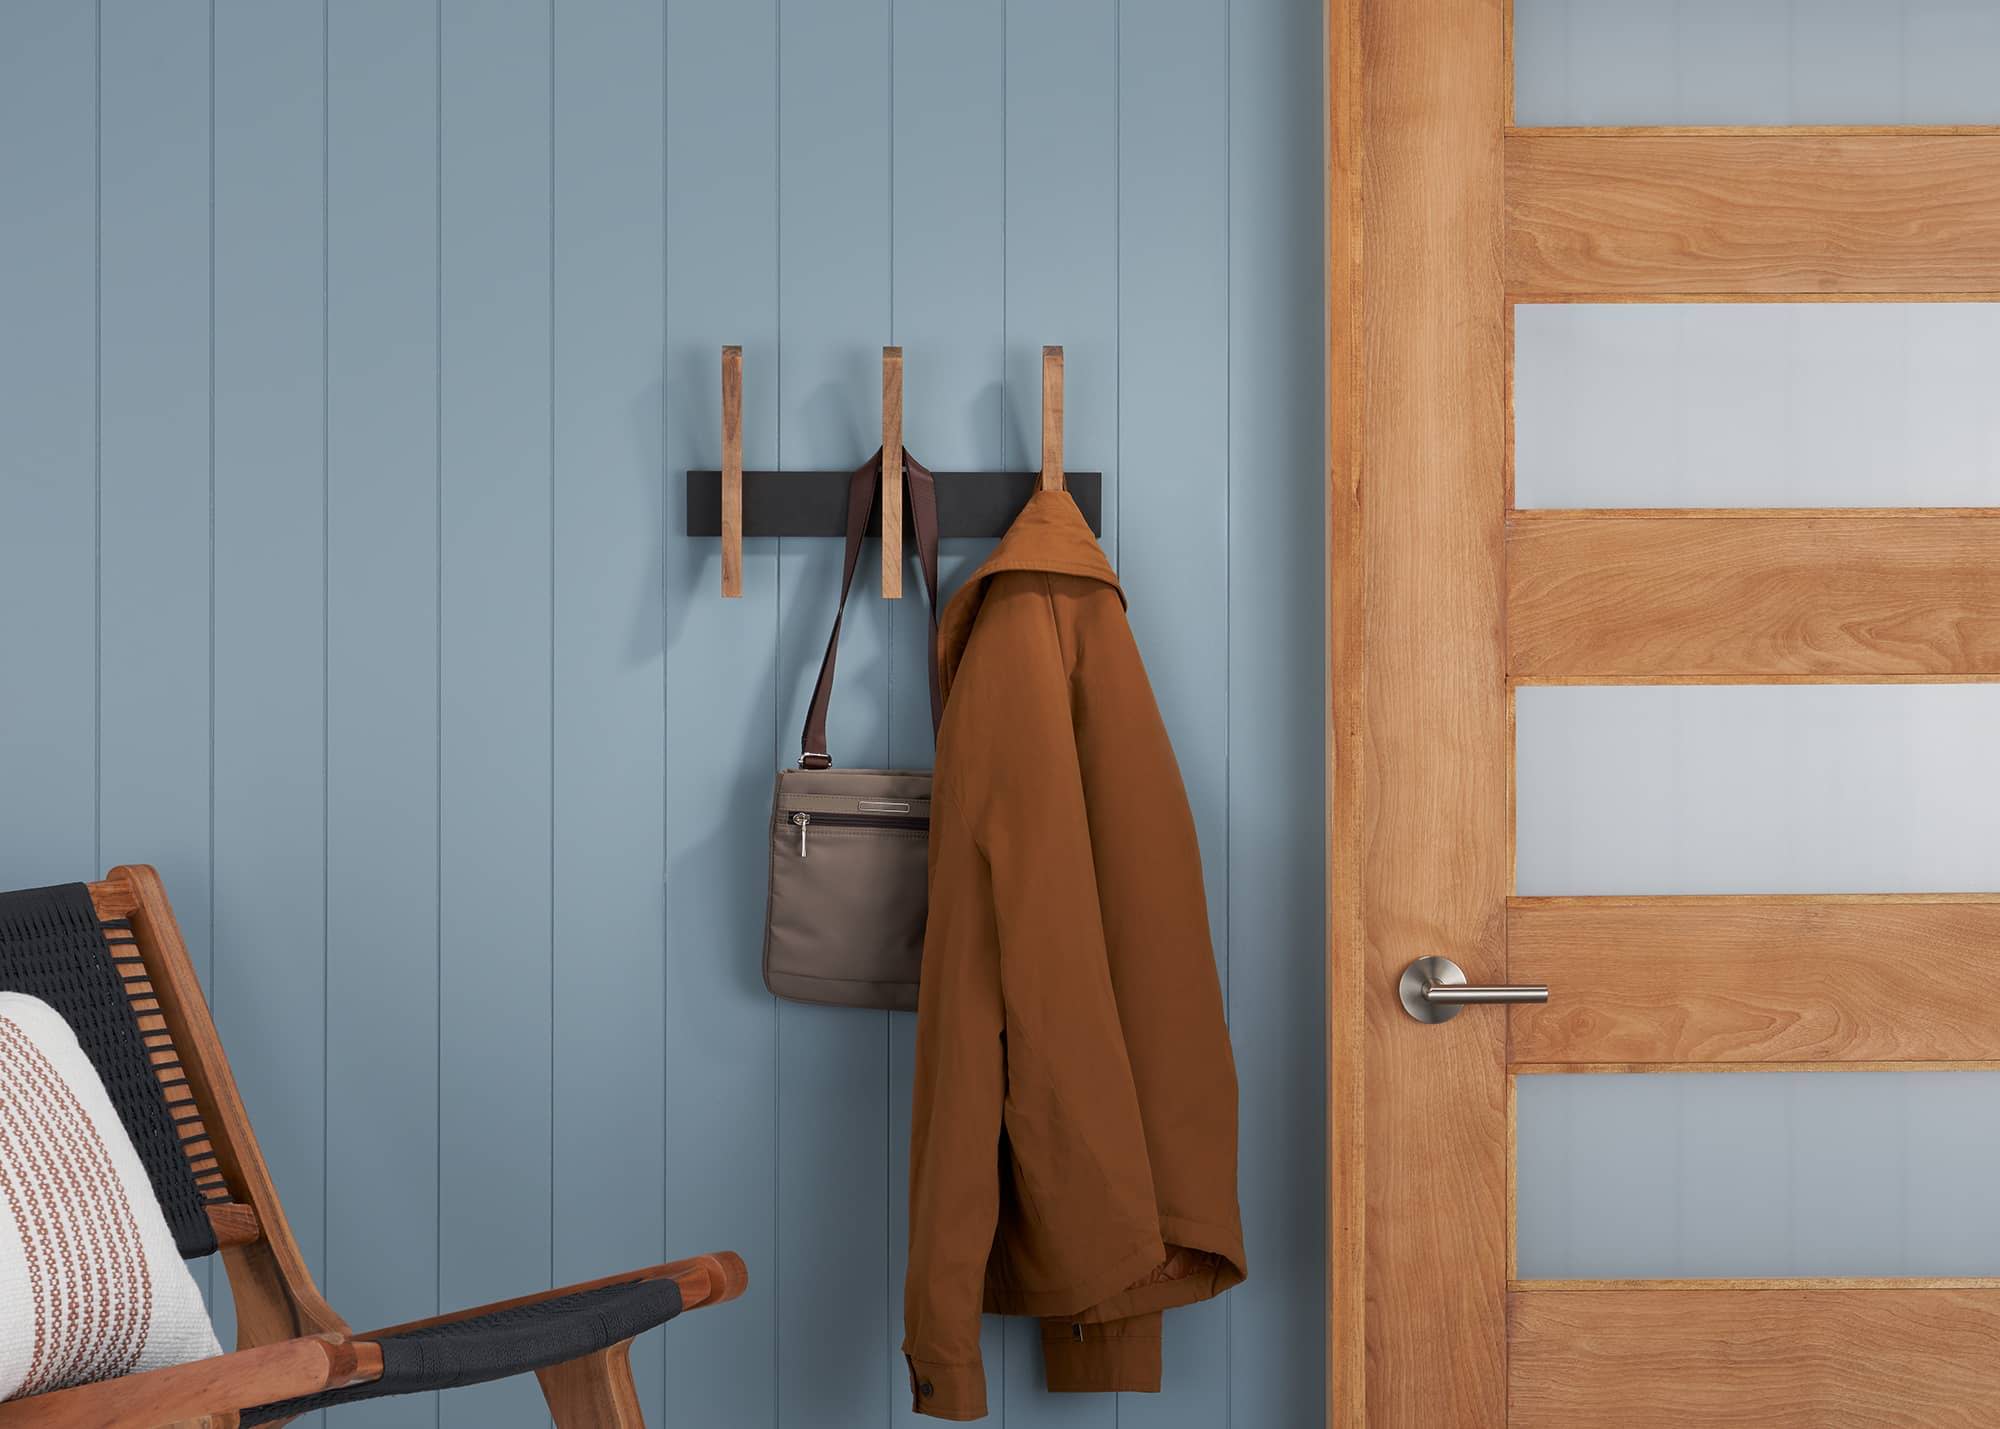 wall rack with 3 wooden hooks on a wall with a sling bag and coat hanging on it